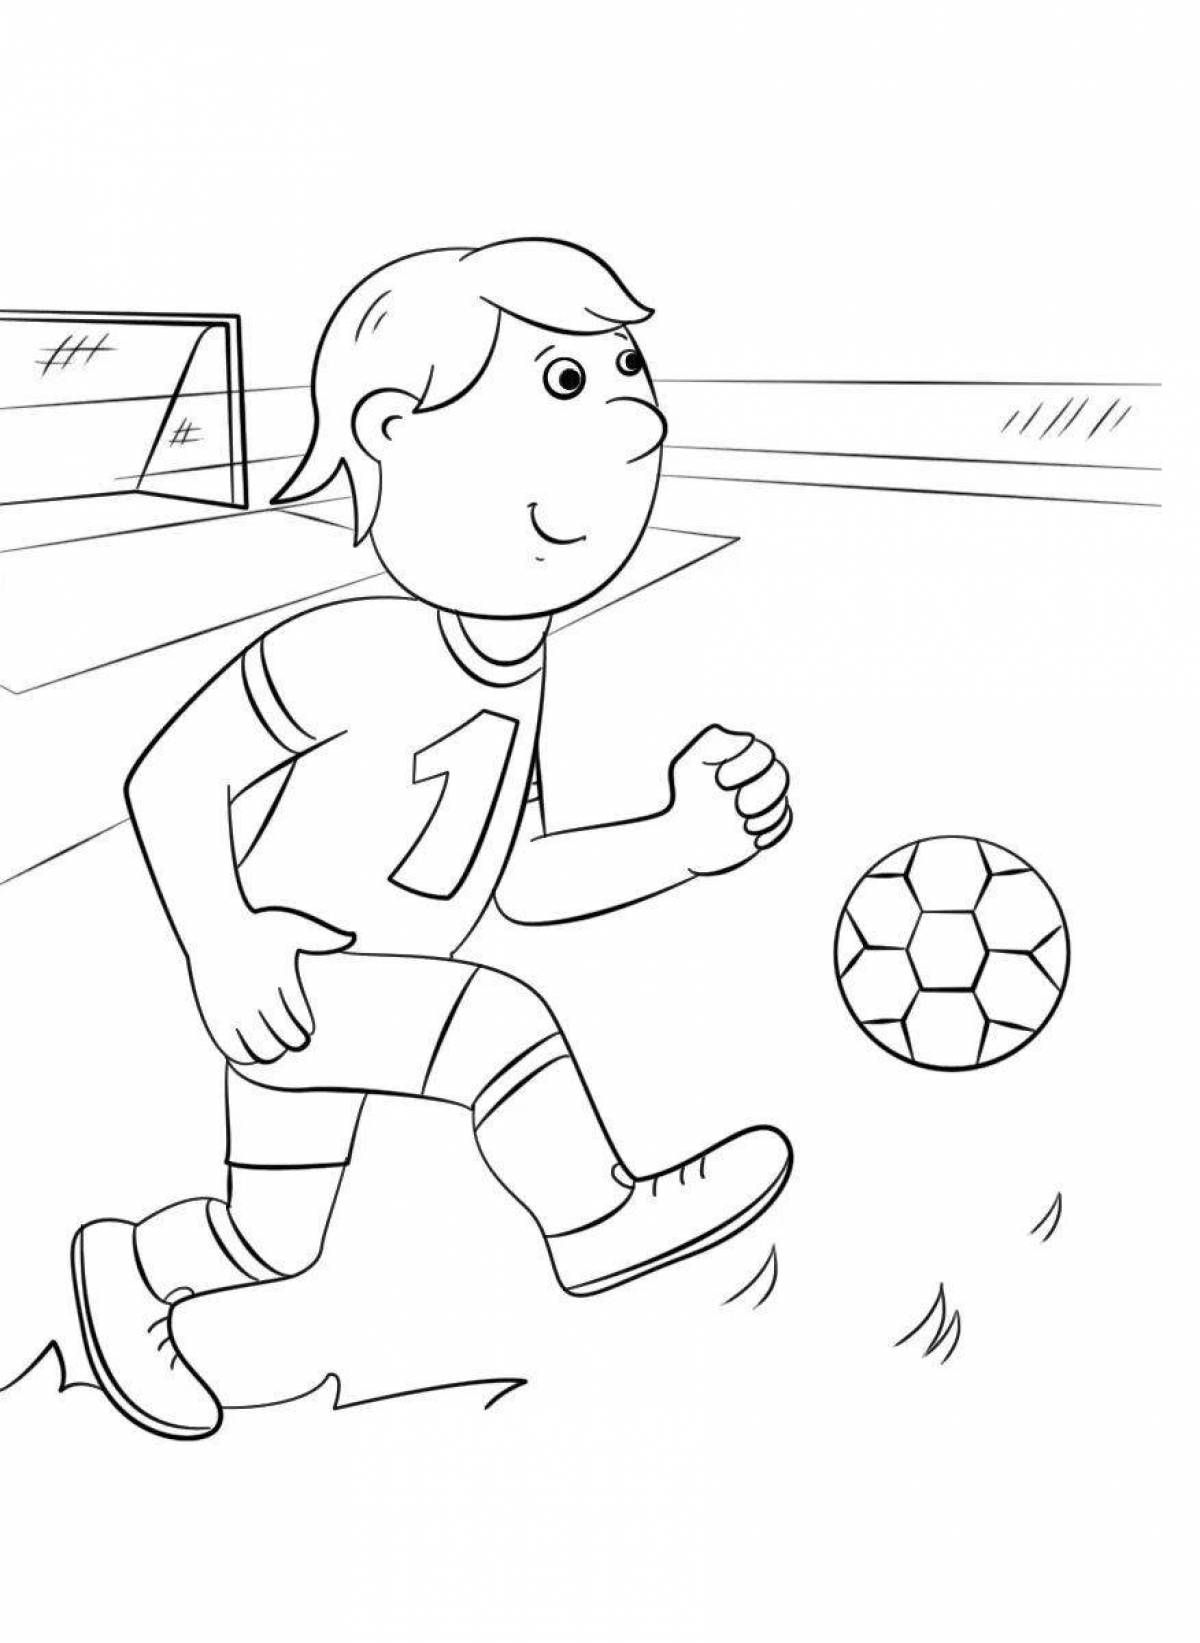 Coloring page glamor football